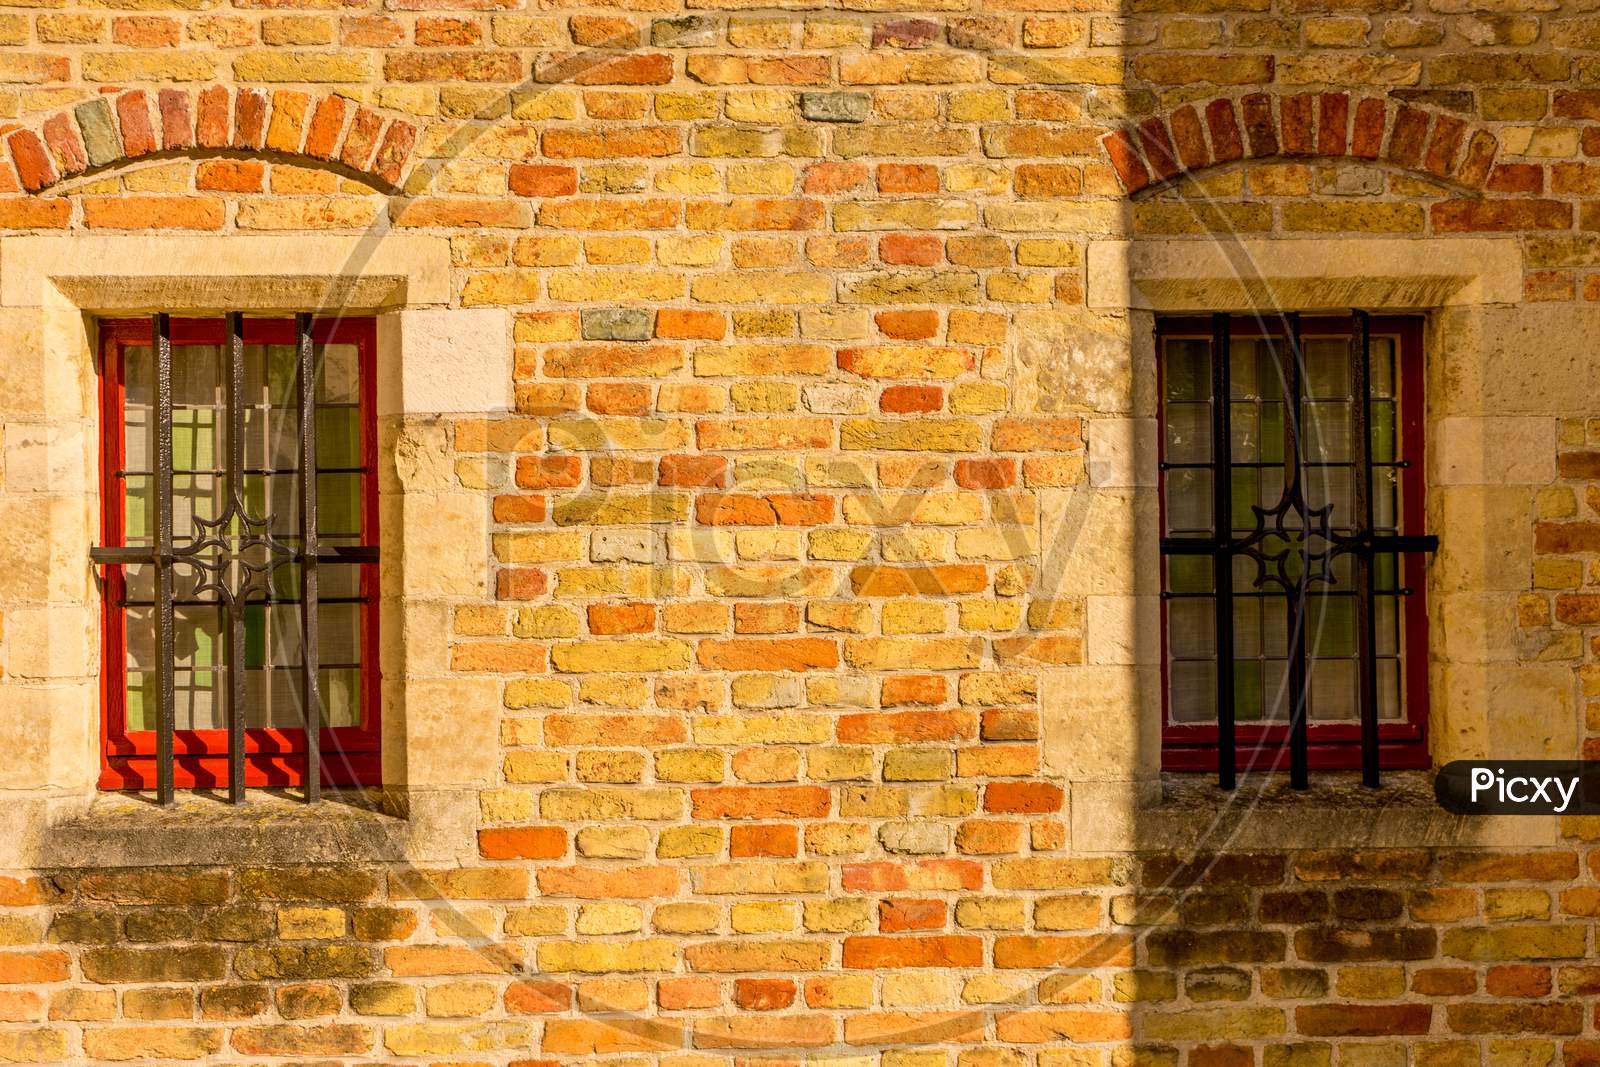 Belgium, Bruges, A Large Brick Building With A Red Window